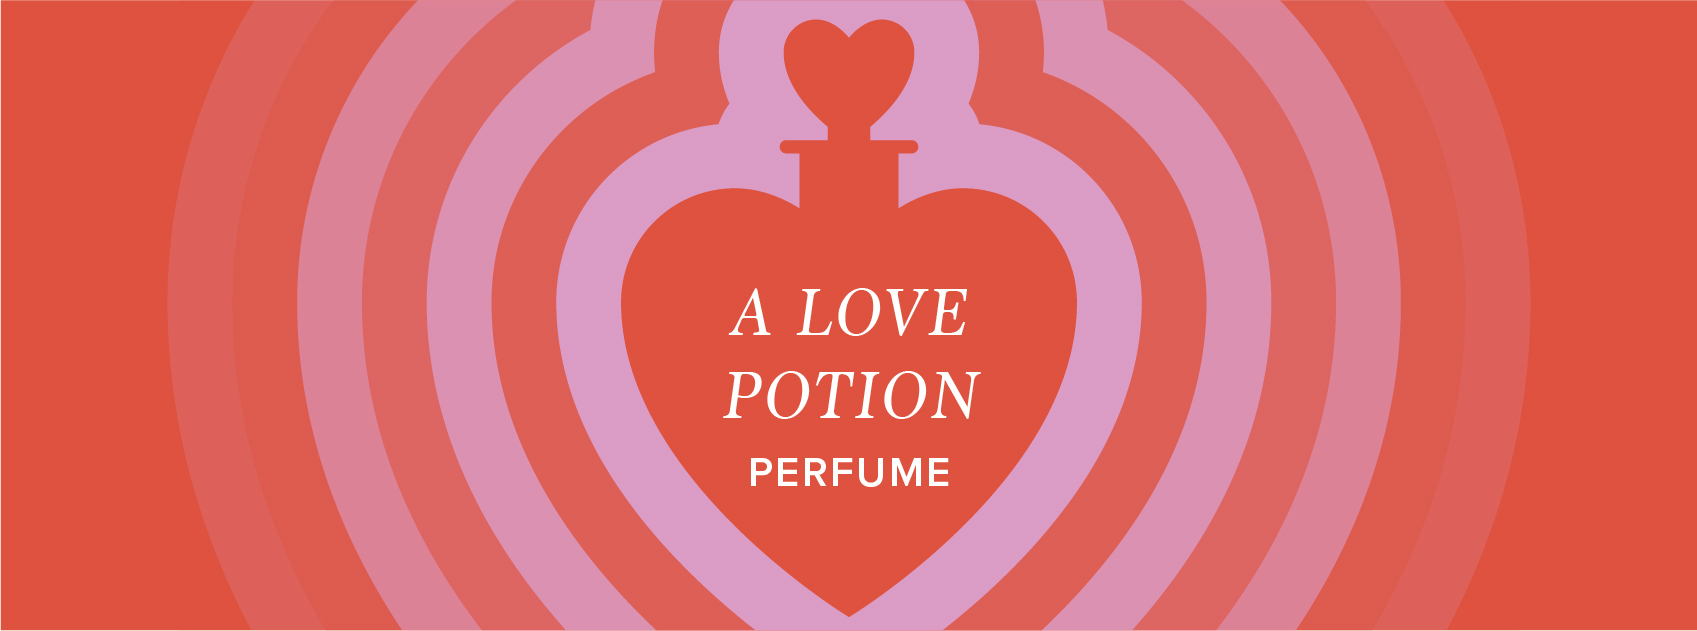 title a love potion perfume in red and pink heart potions